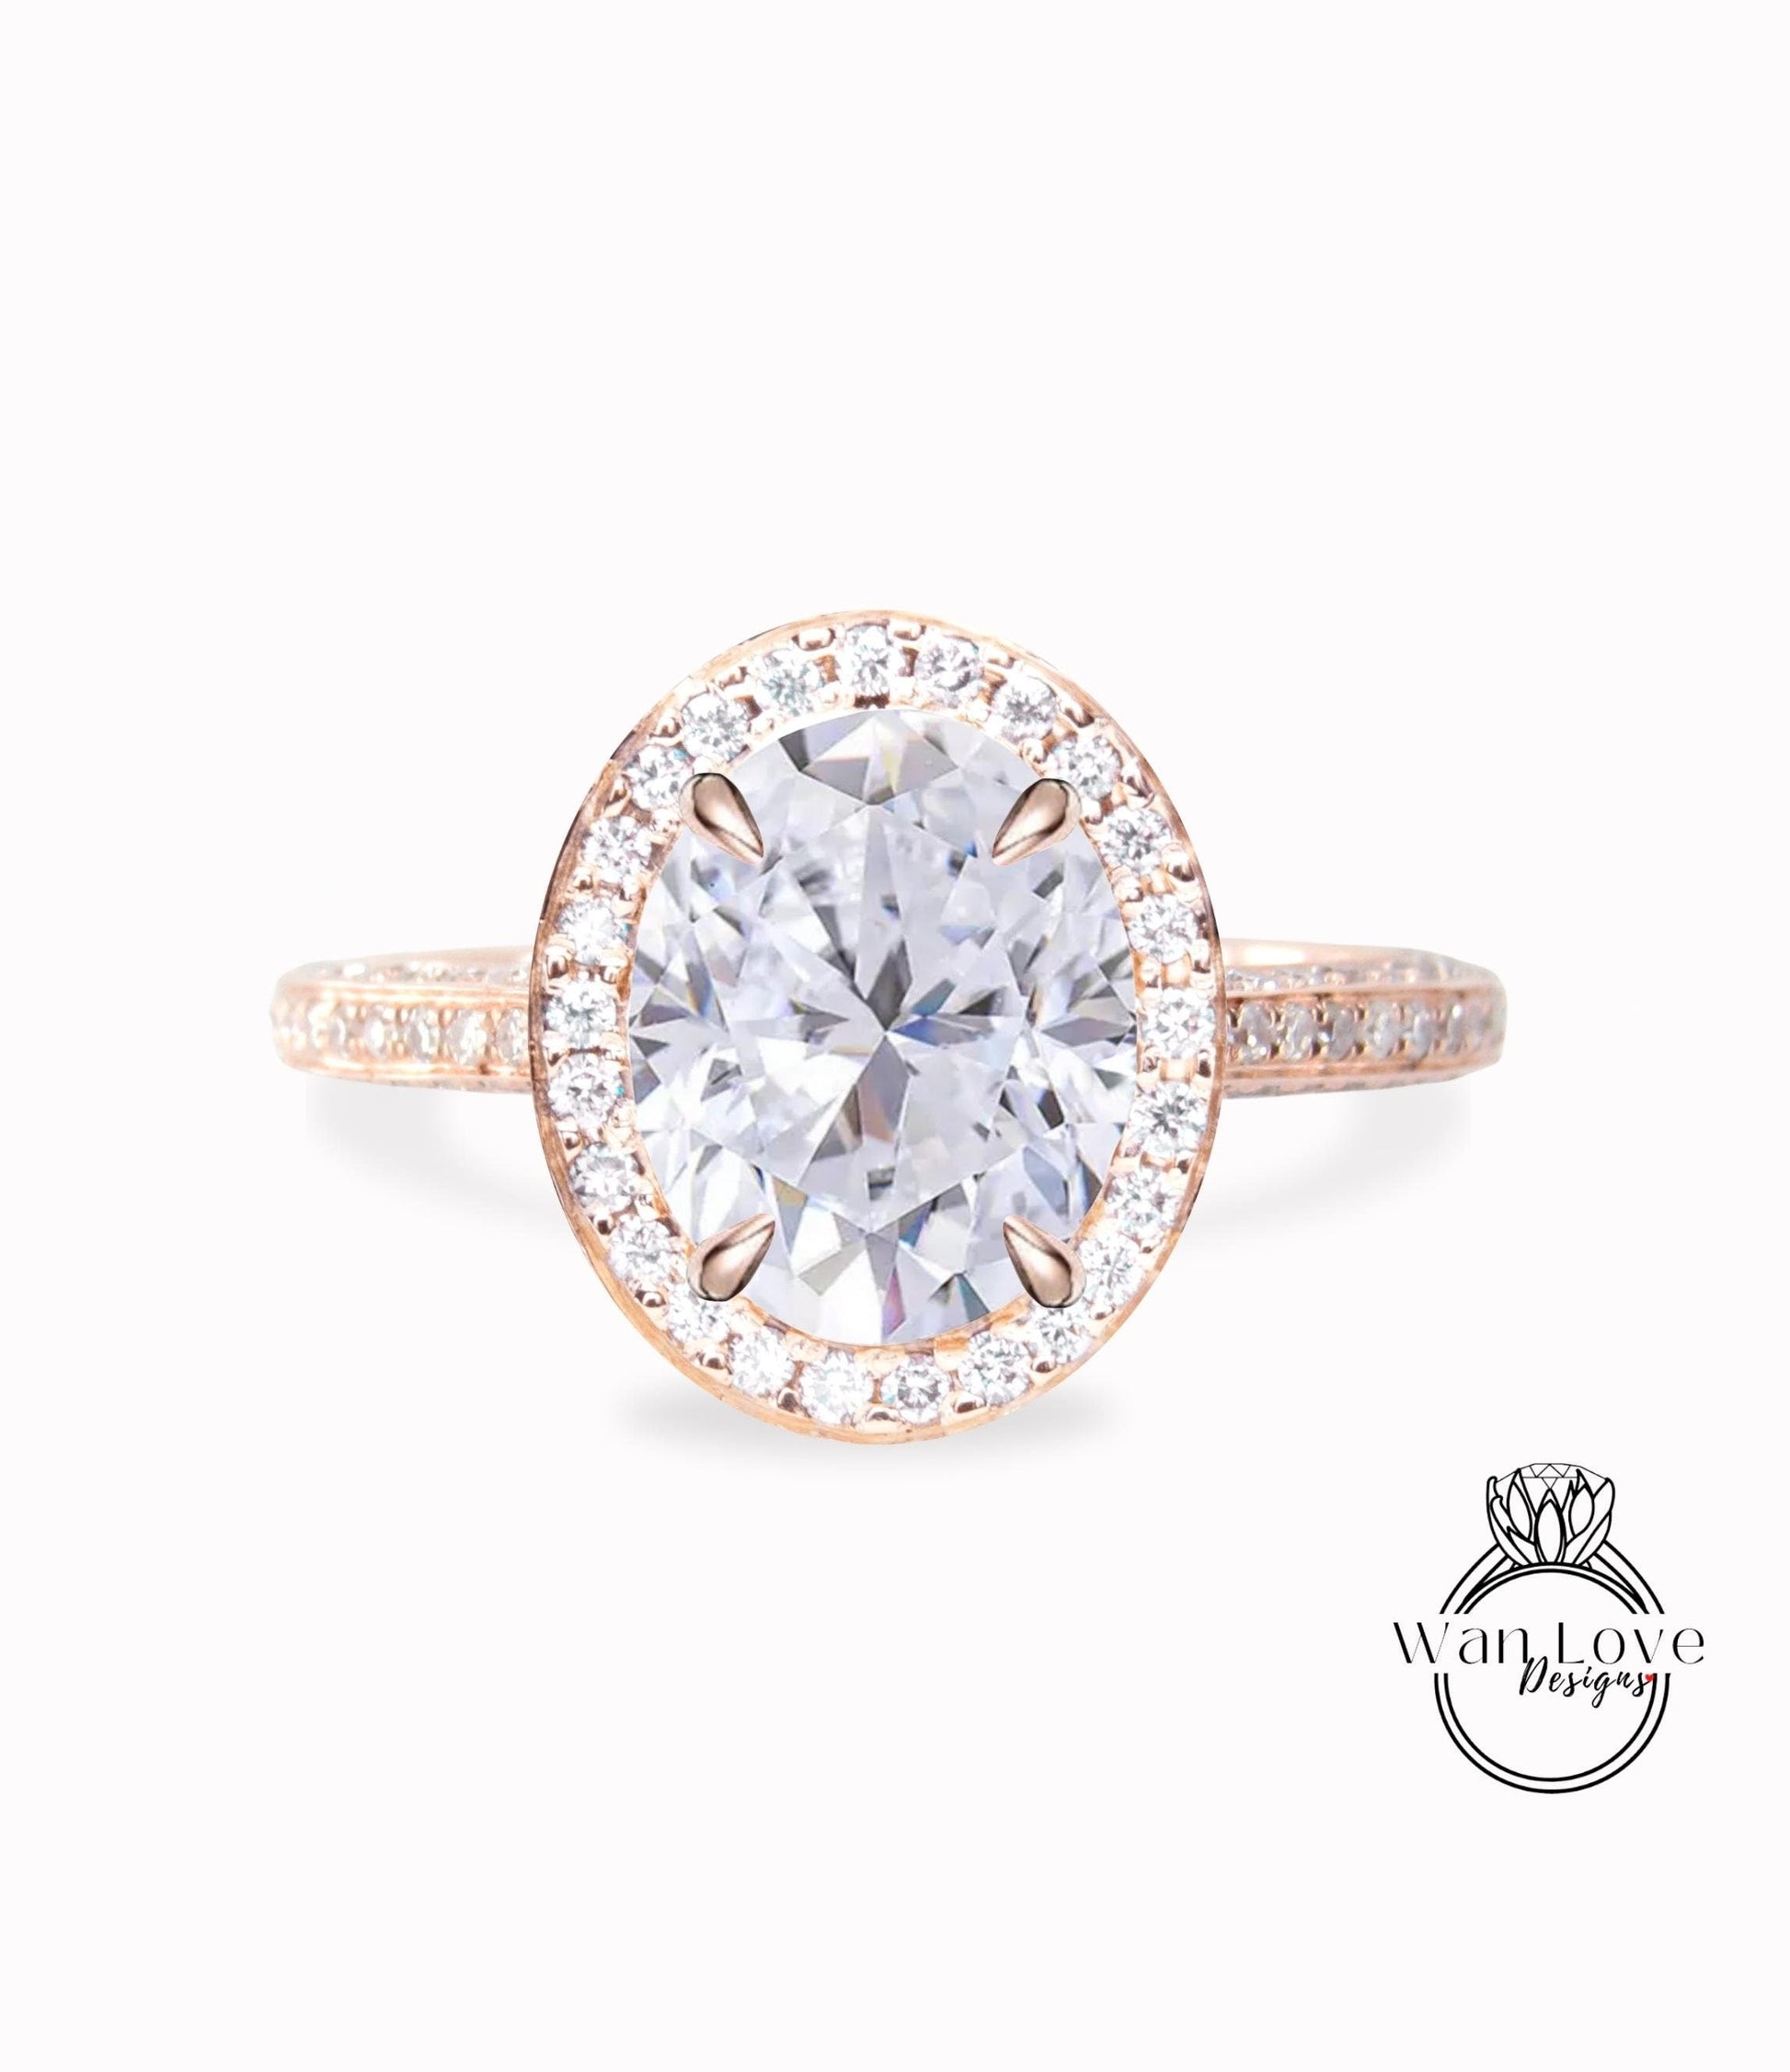 Moissanite engagement ring Oval shape vintage white gold ring antique art deco halo unique ring promise anniversary bridal ring wedding ring Wan Love Designs